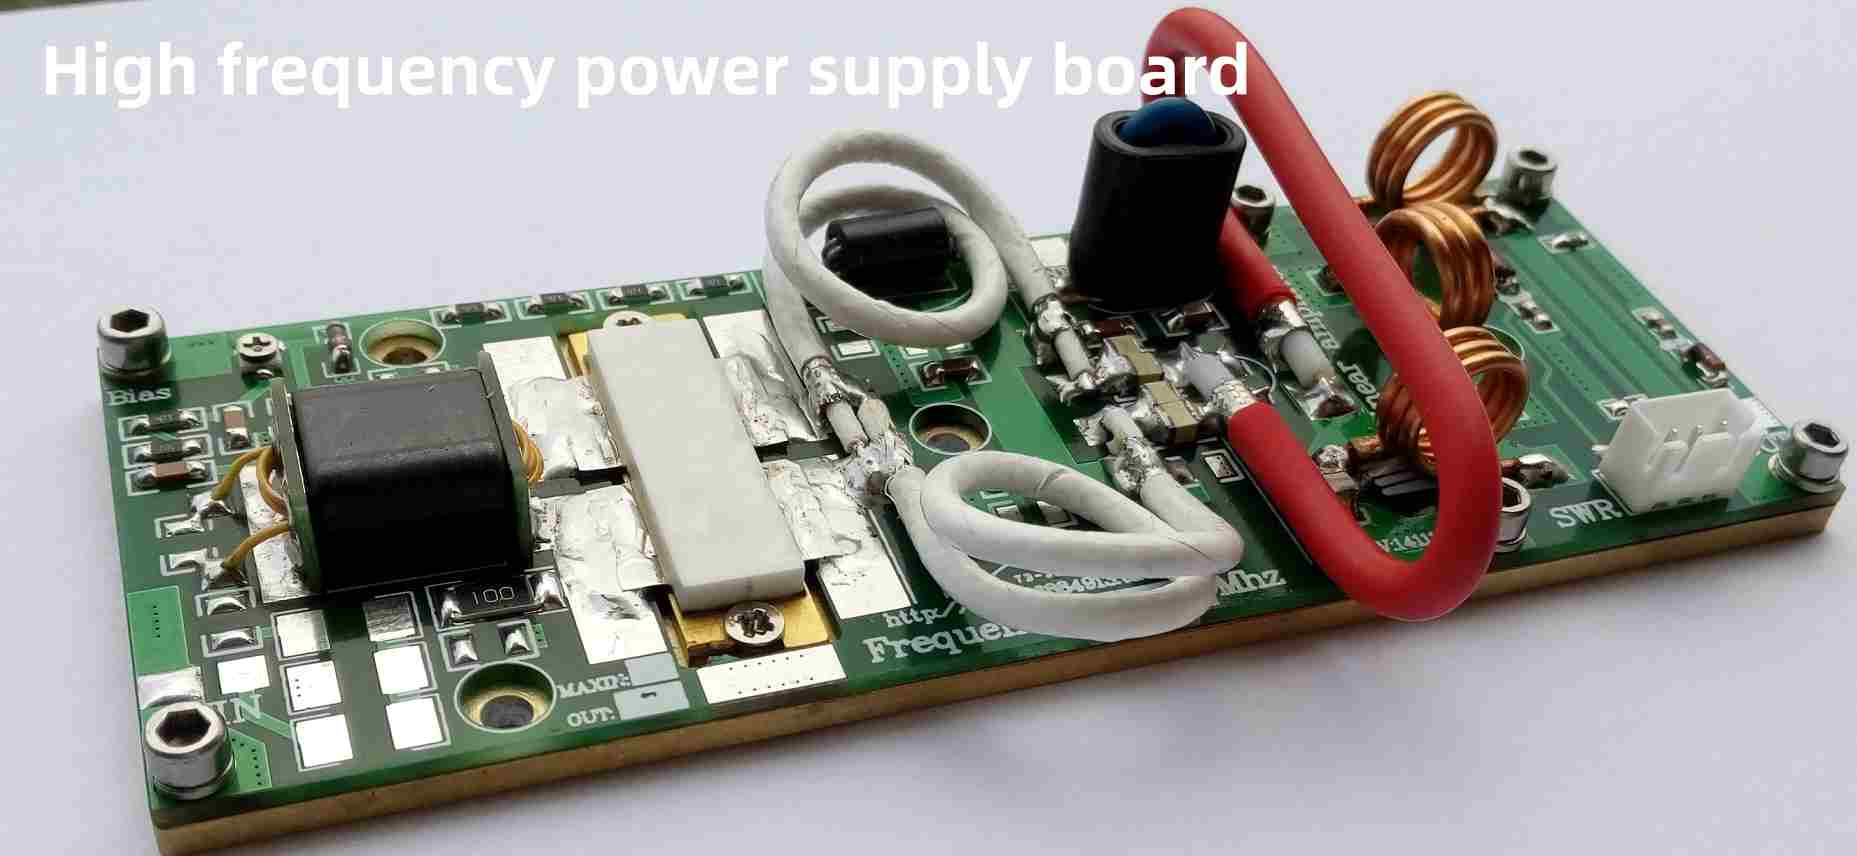 High frequency power supply board